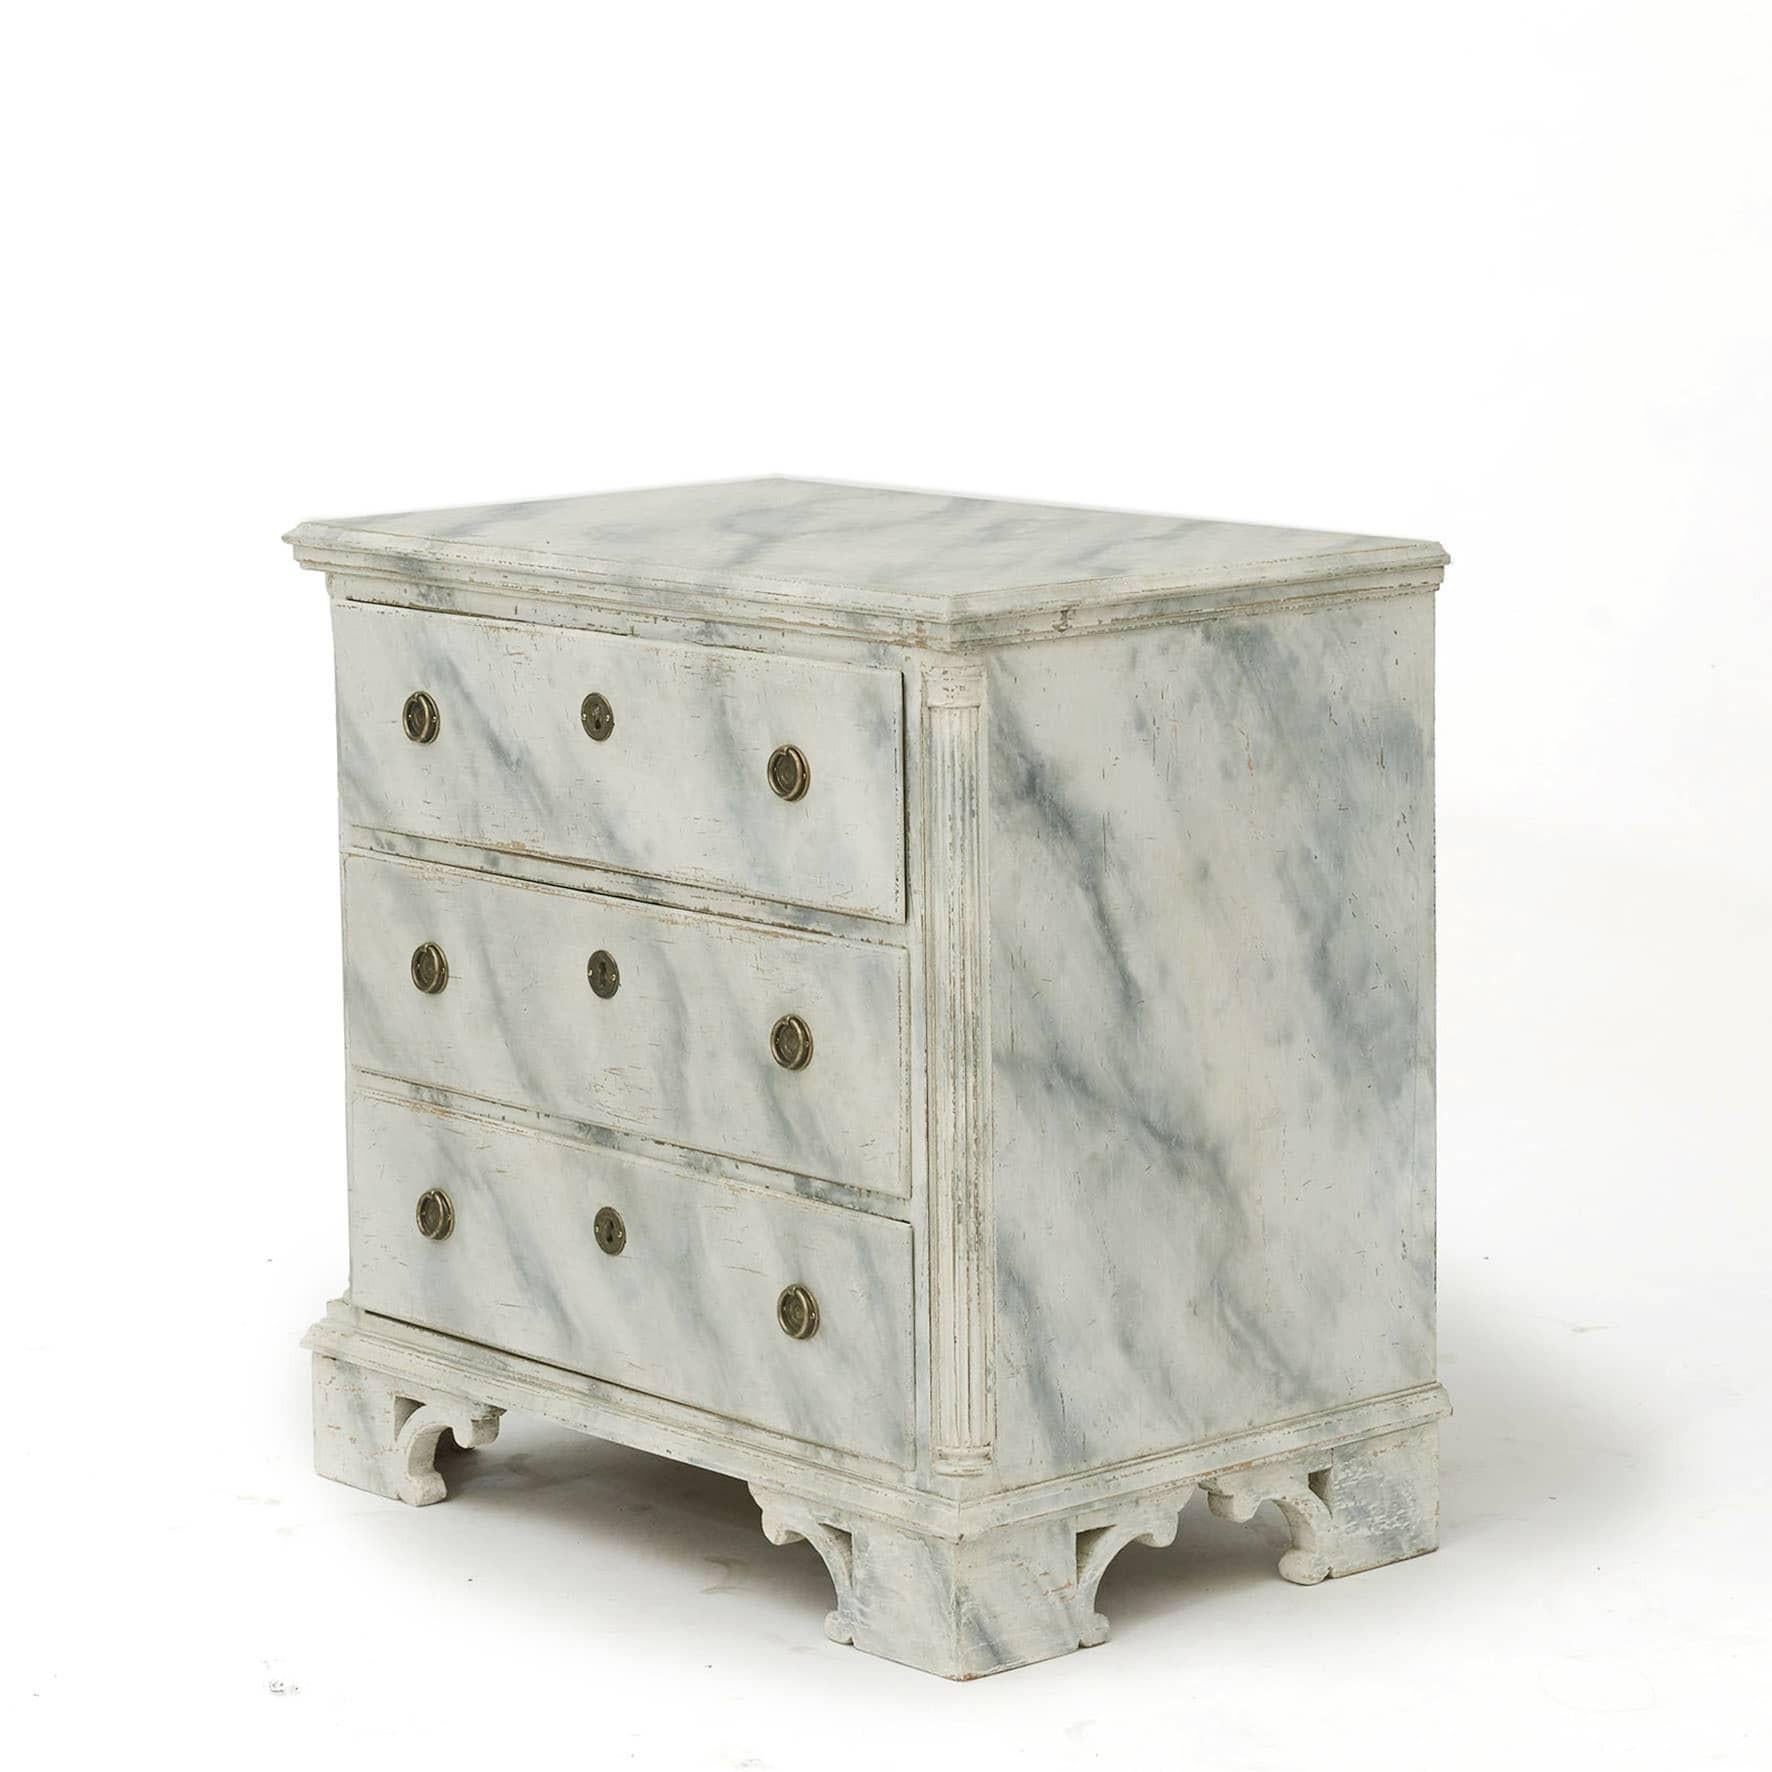 Gustavian chest of drawers with 3 drawers.
Sides with fluted quartz columns.
Gray marbled - conservator restored.

Sweden / Denmark 1780-1790.